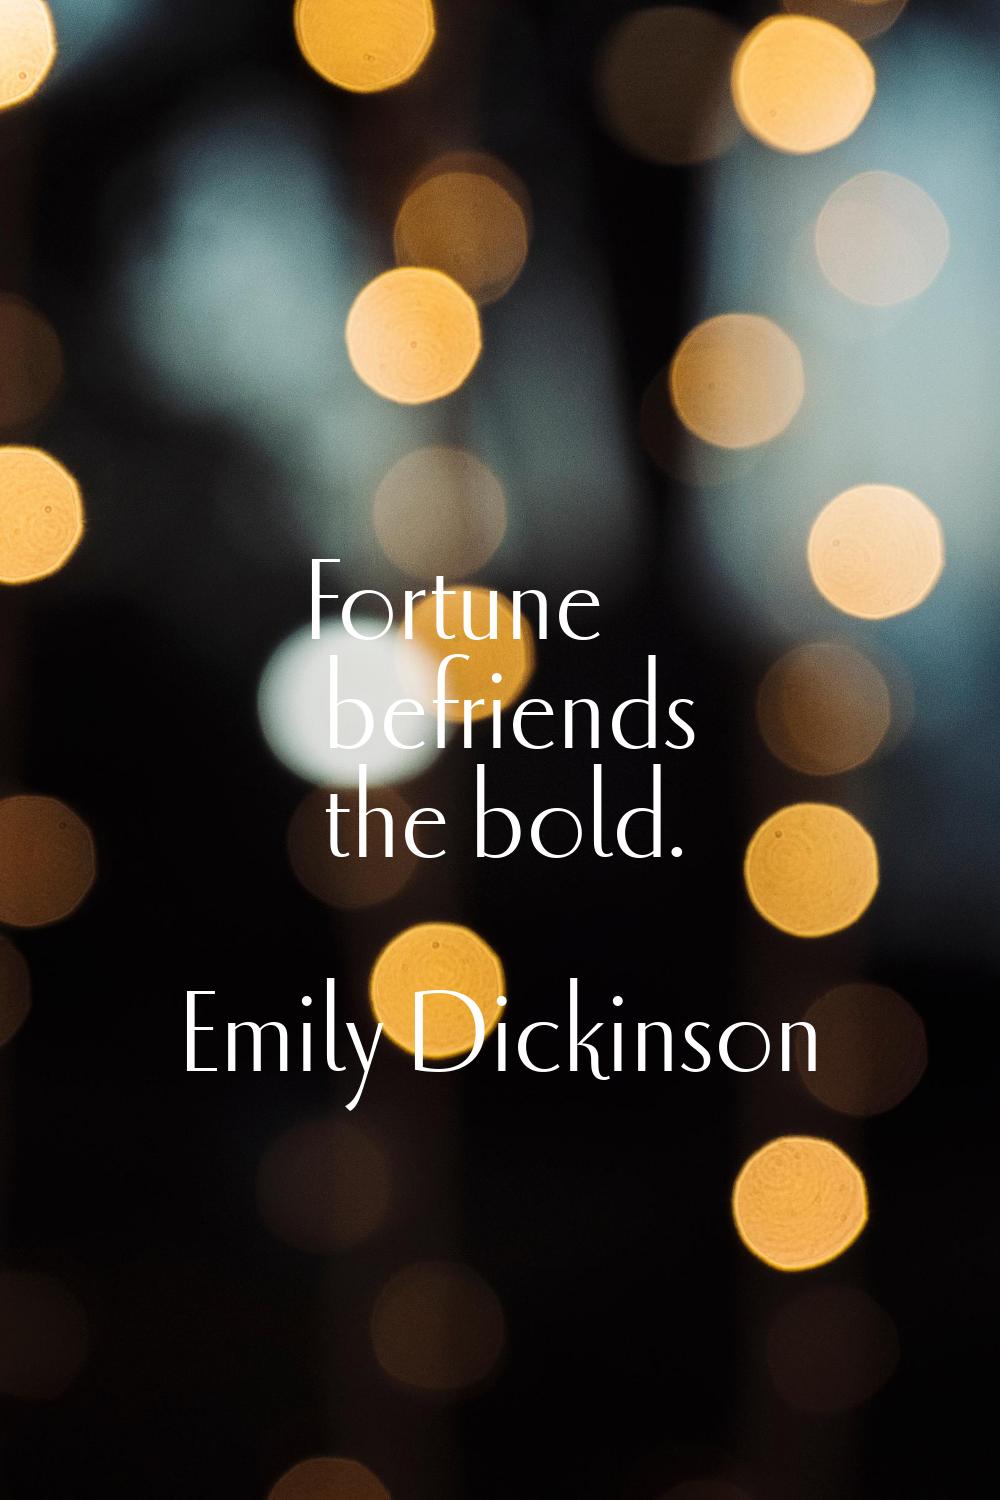 Fortune befriends the bold.